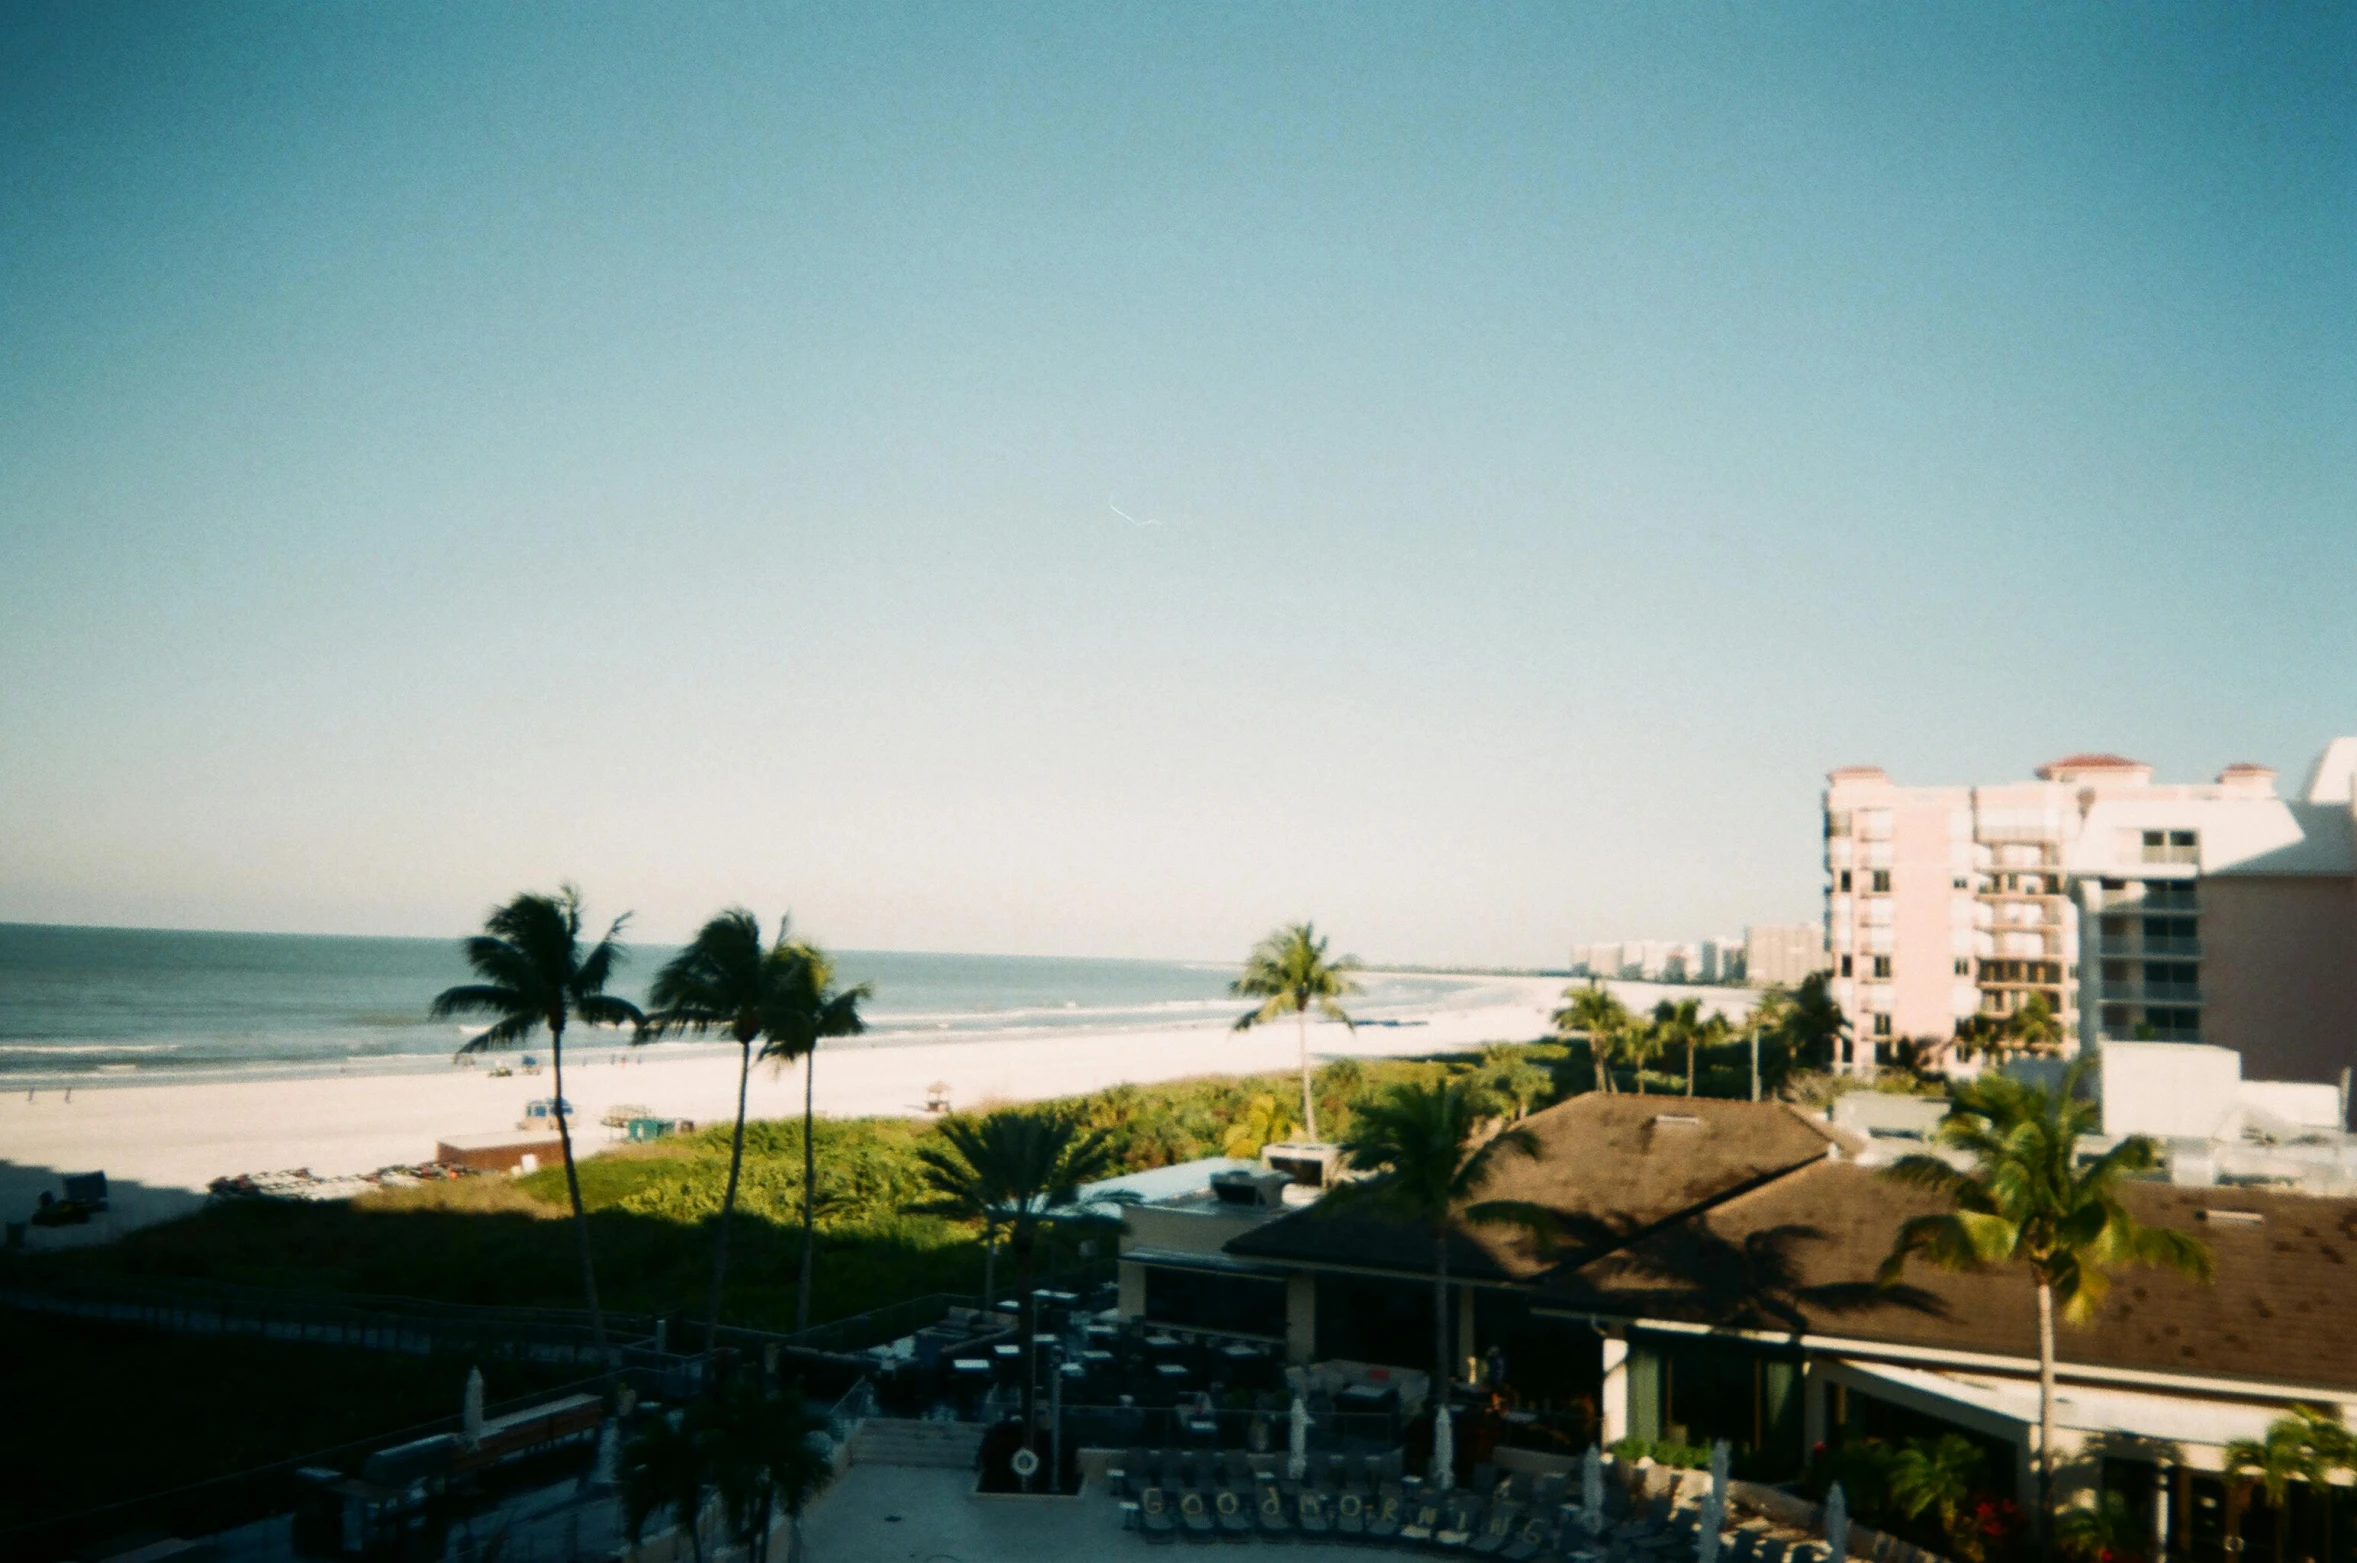 a view of the beach from the balcony of a hotel, a polaroid photo, pexels contest winner, happening, florida, shot on hasselblad, clear skies in the distance, bald head